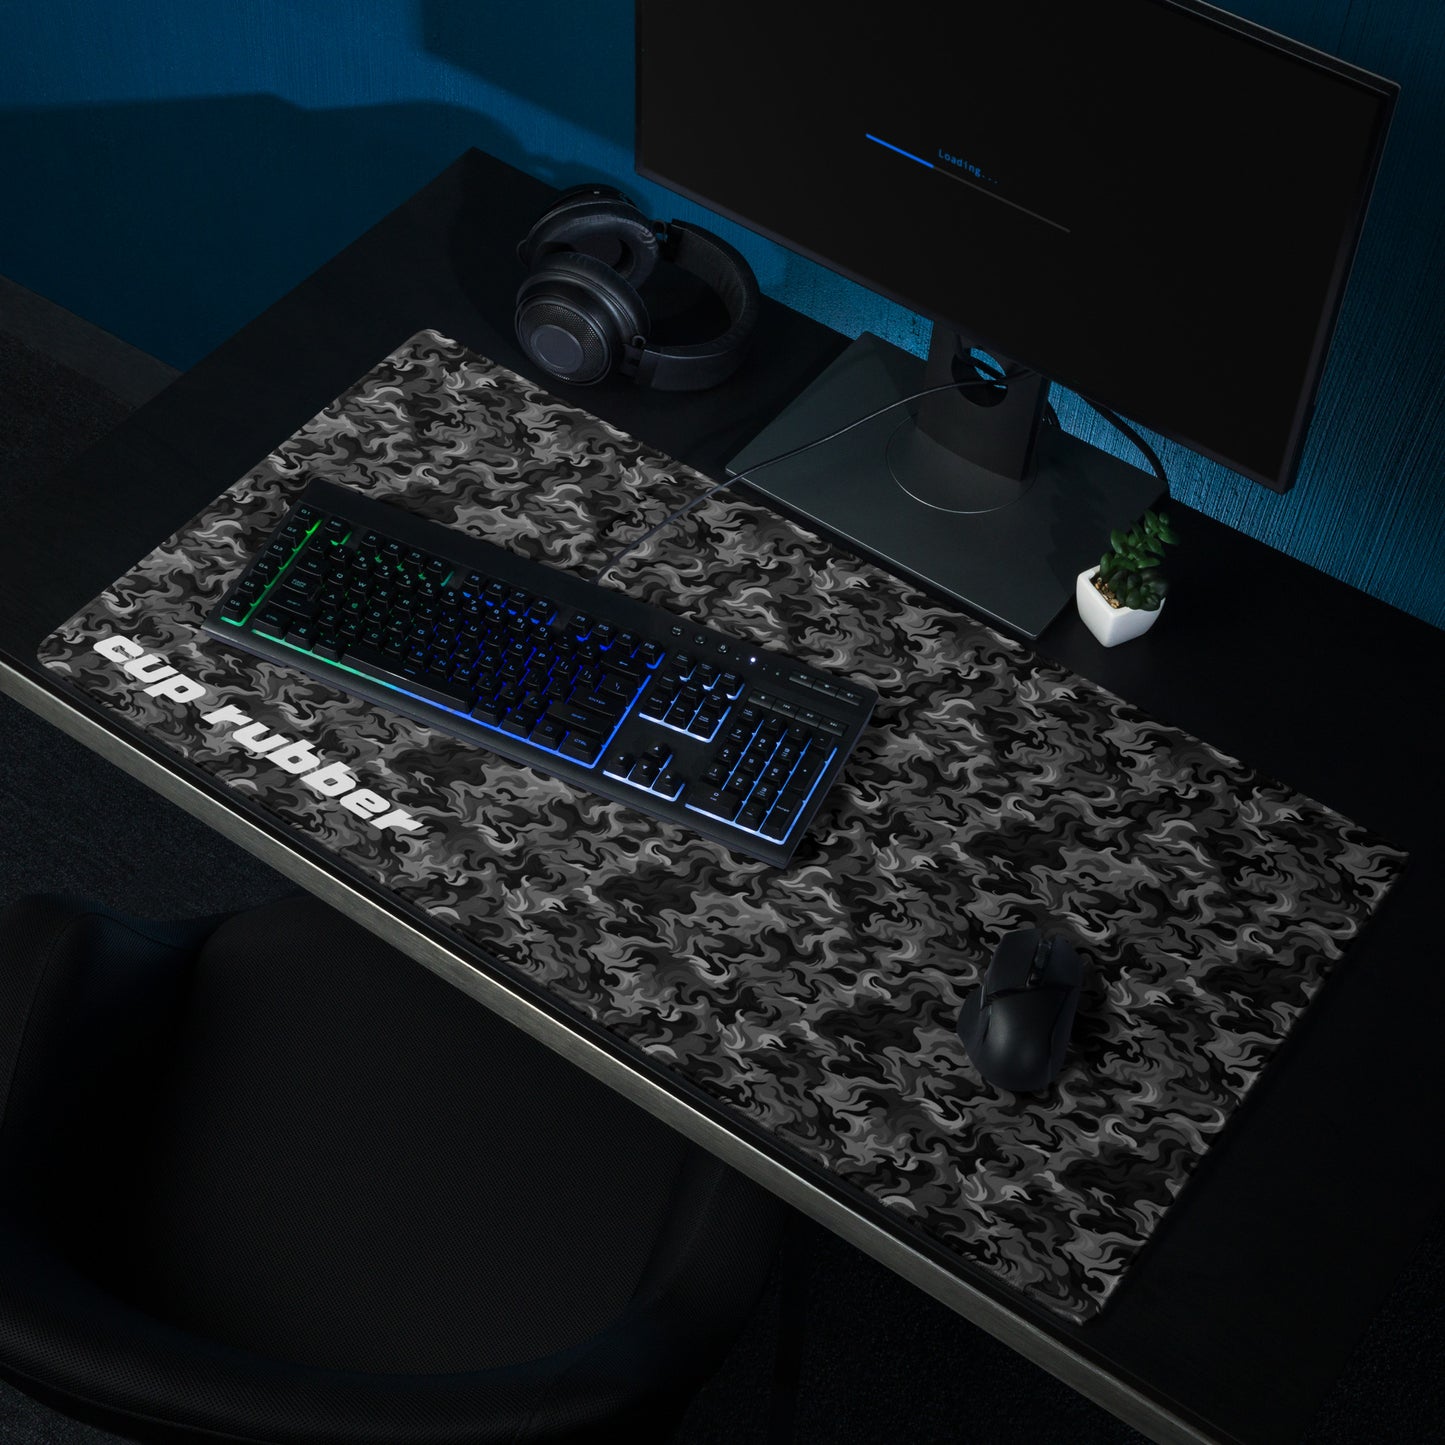 A 36" x 18" desk pad with a camo pattern all over it and the word "Cup Rubber" in the bottom left corner shown on a desk setup. Black and Charcoal in color.